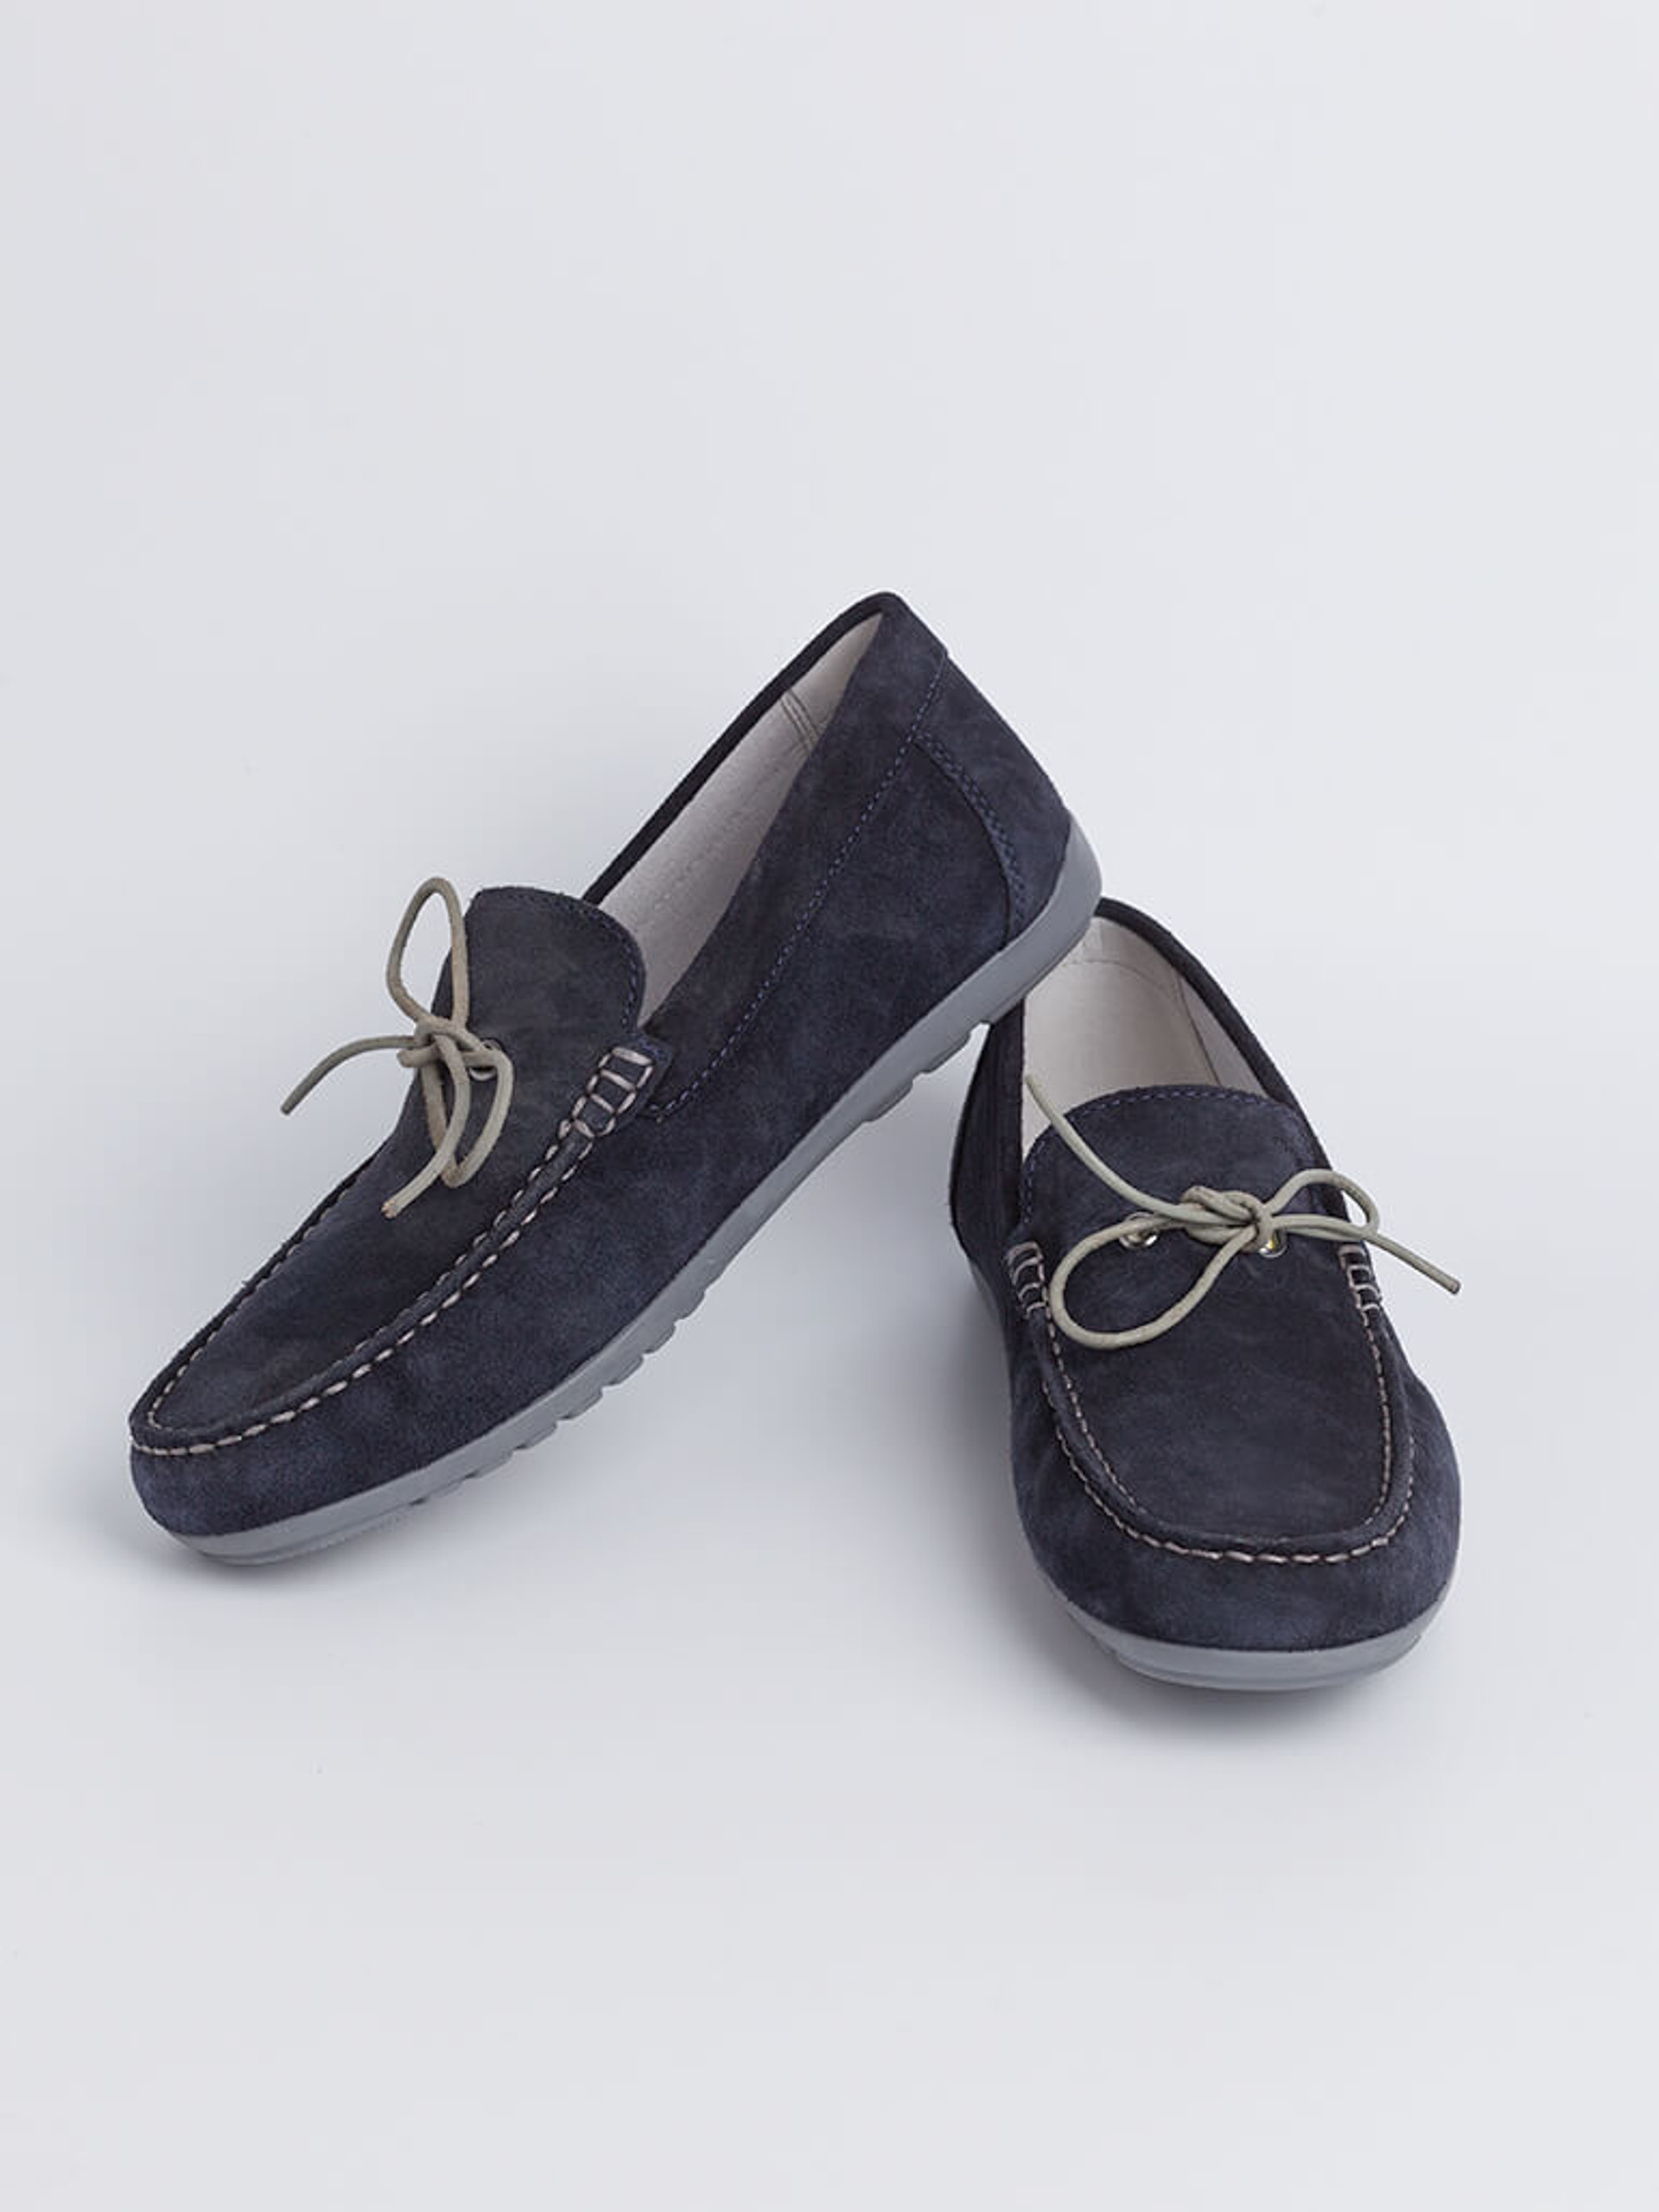 Doe Gray Geox Errico Moccasin Suede Shoe | Peter Christian